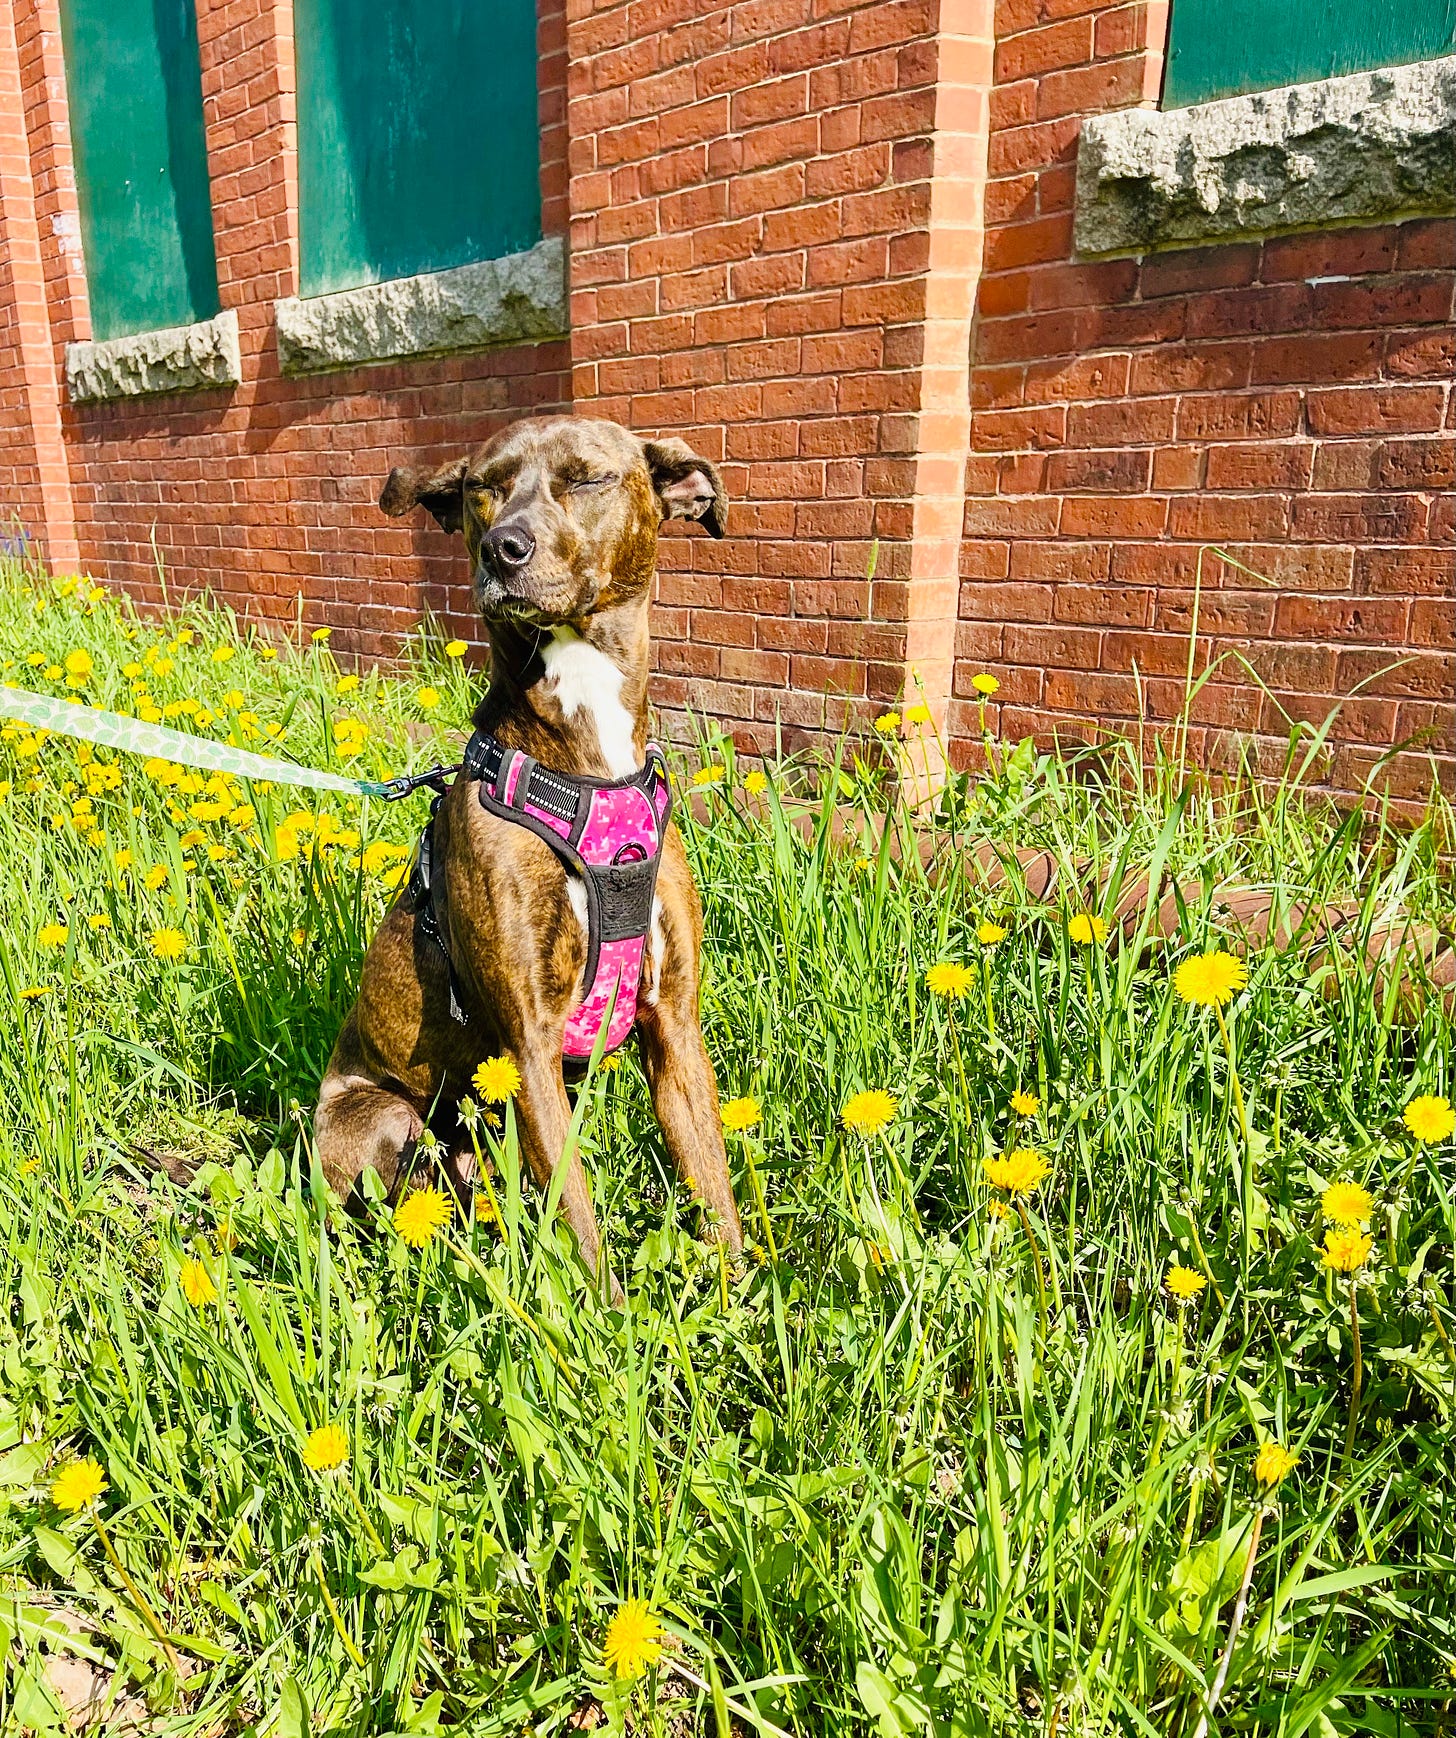 Dog with her eyes closed standing in dandelions outside a brick building